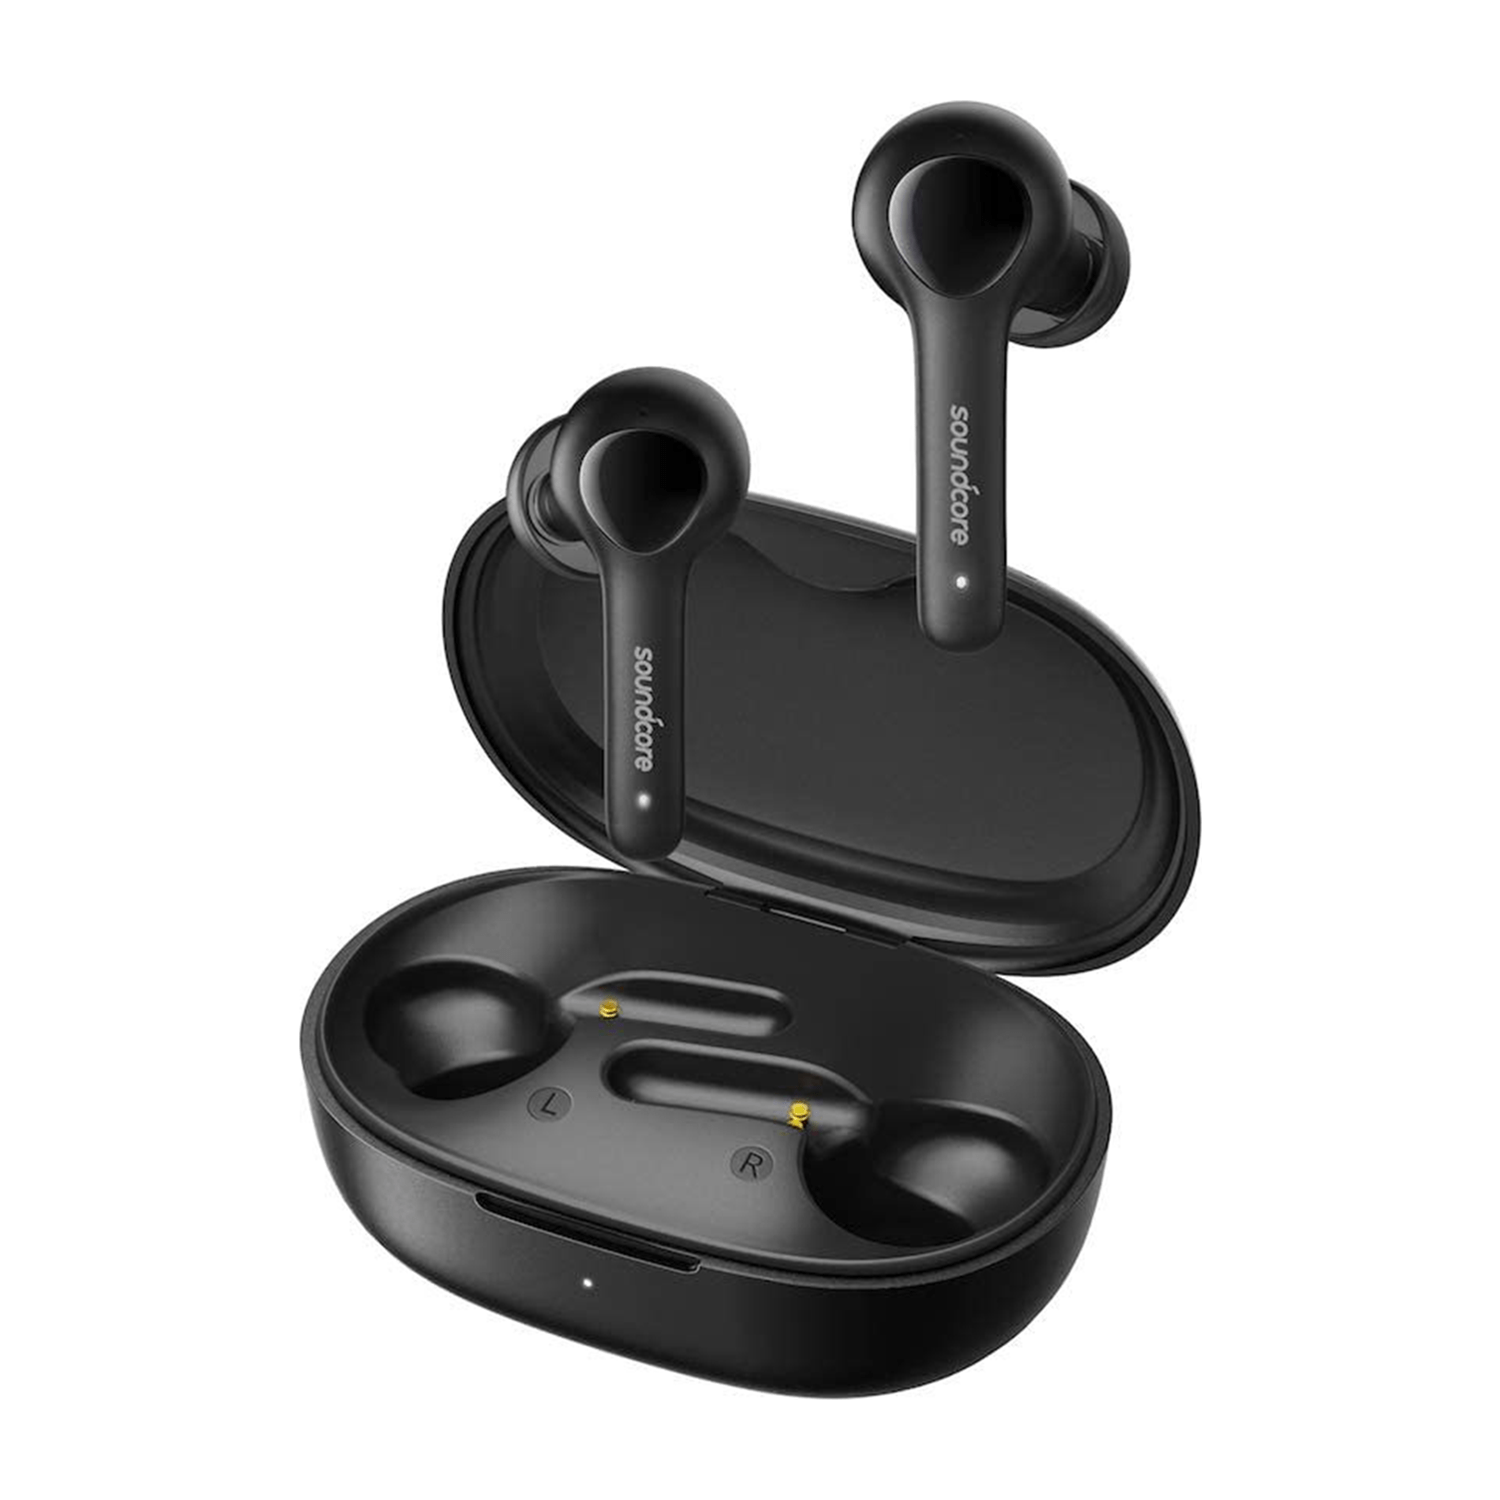 Anker SoundCore Life Note Total Wireless Earbuds Black